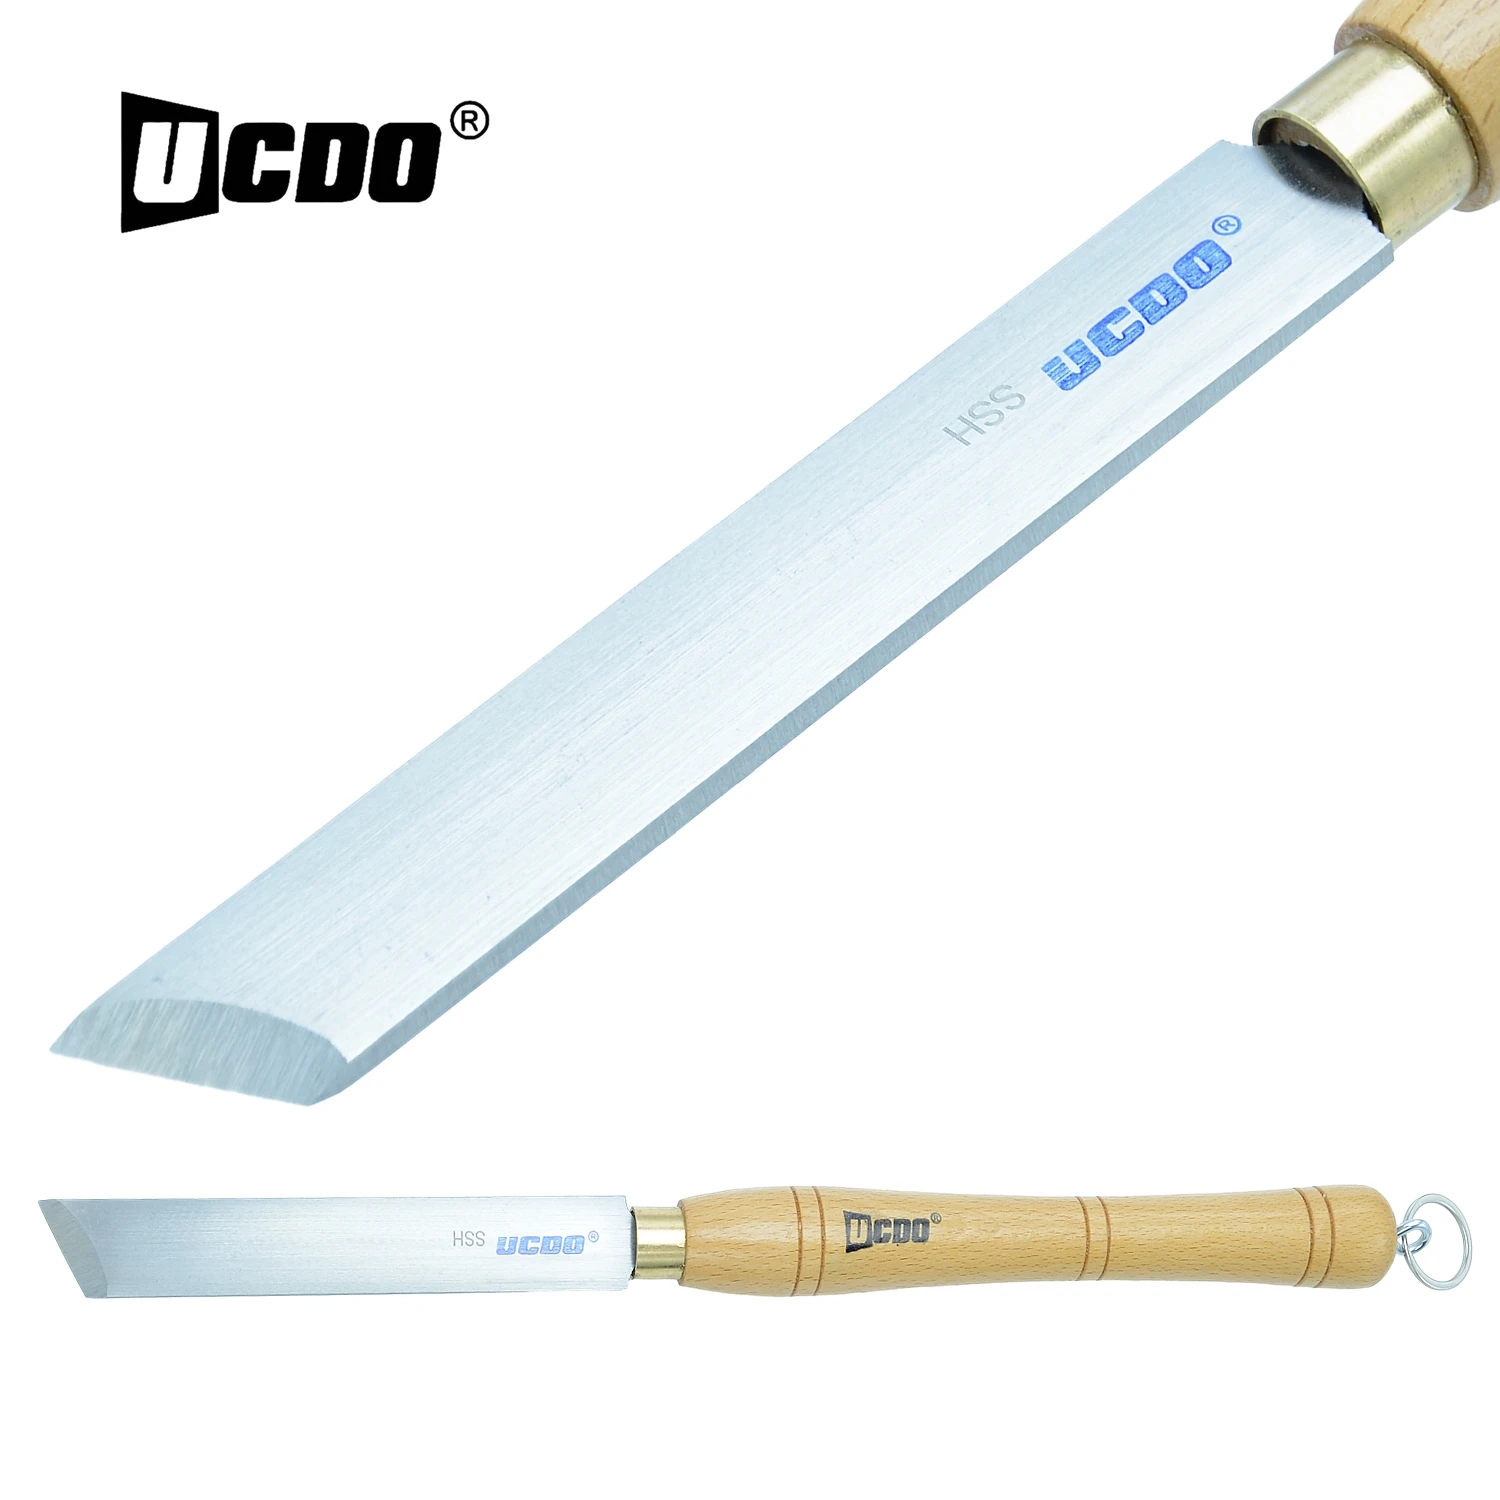 

UCDO HSS 26mm Woodturning Big Oval Skew Chisel Lathe Gouge Knife Solid Wood Handle With Hanging Rings Woodworking DIY